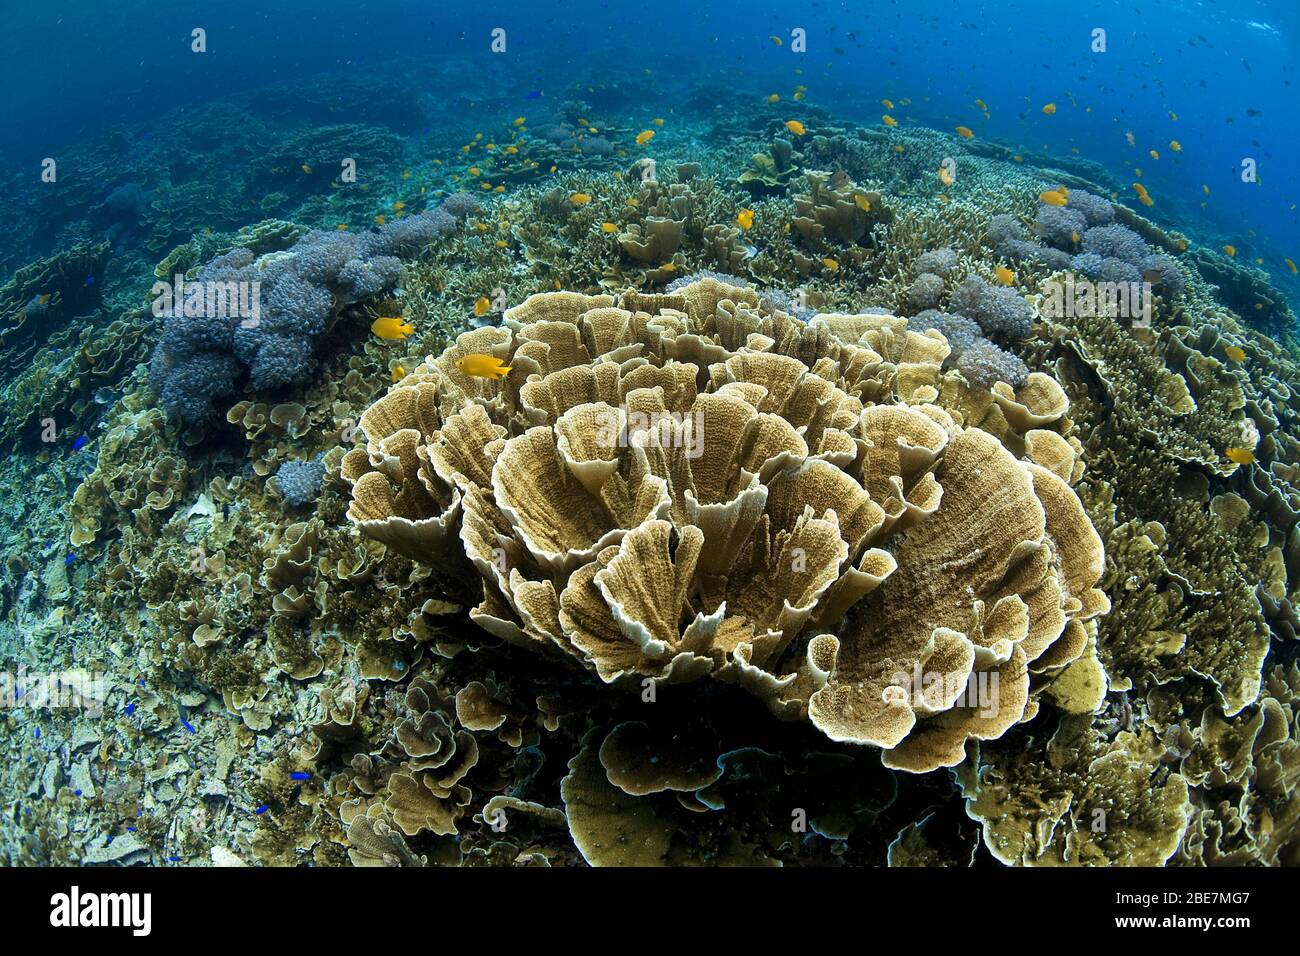 Coral reef with dominating Montipora corals (Acroporidae), Mindanao, Philippines Stock Photo